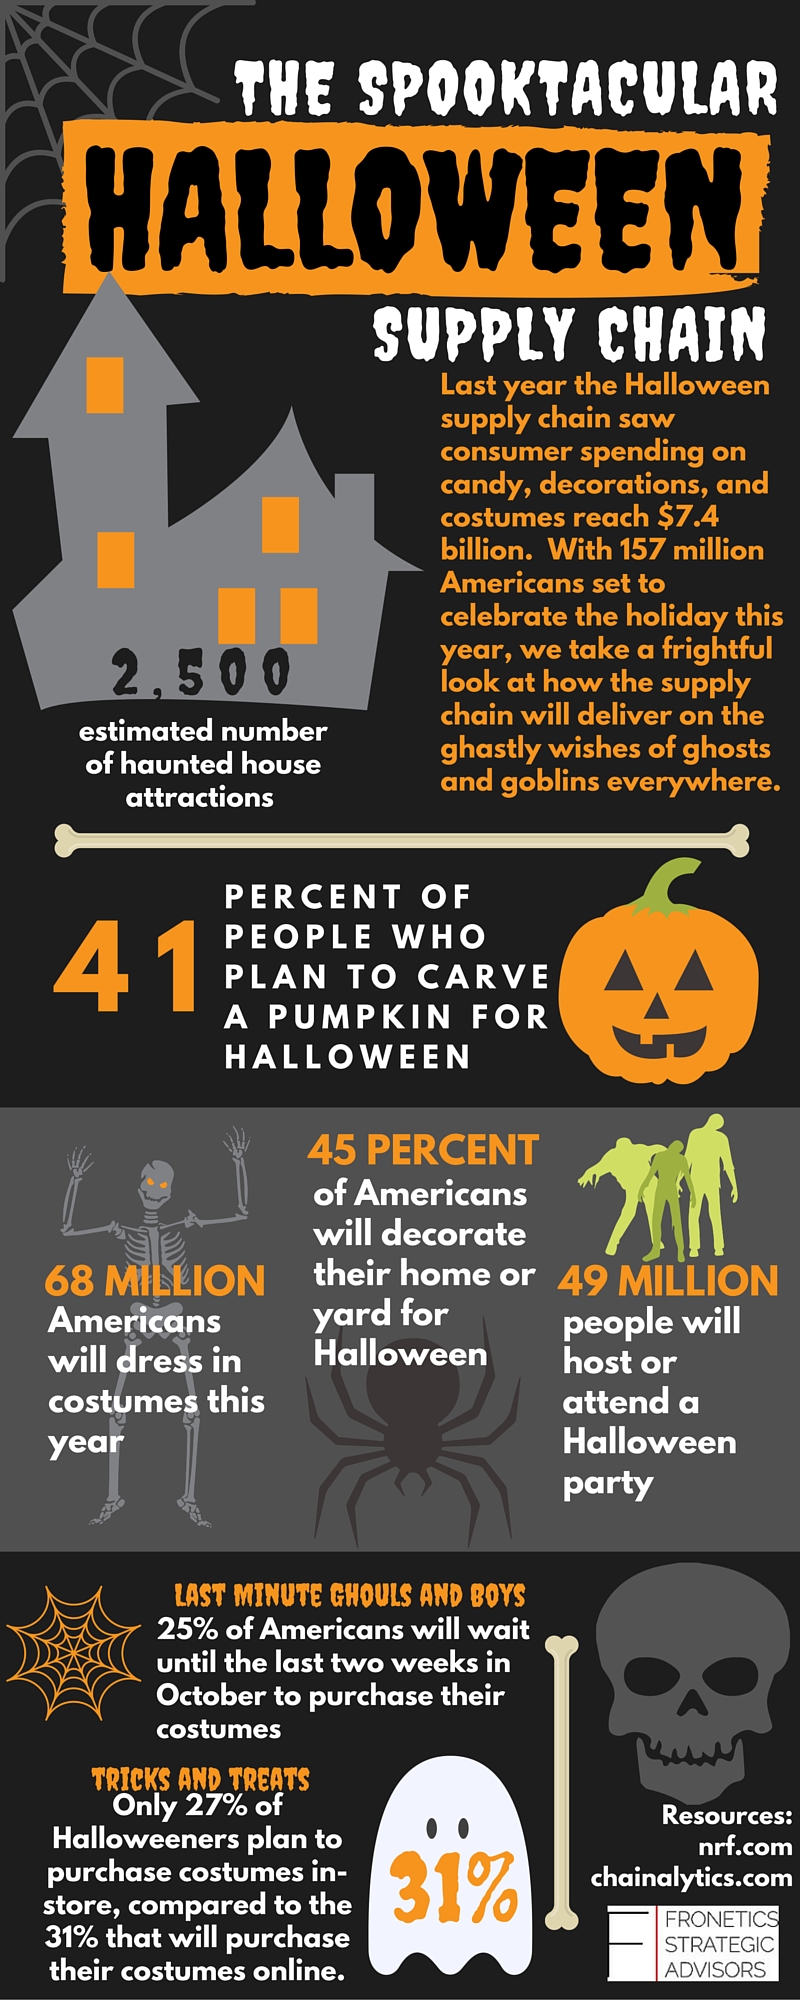 A Halloween supply chain infographic